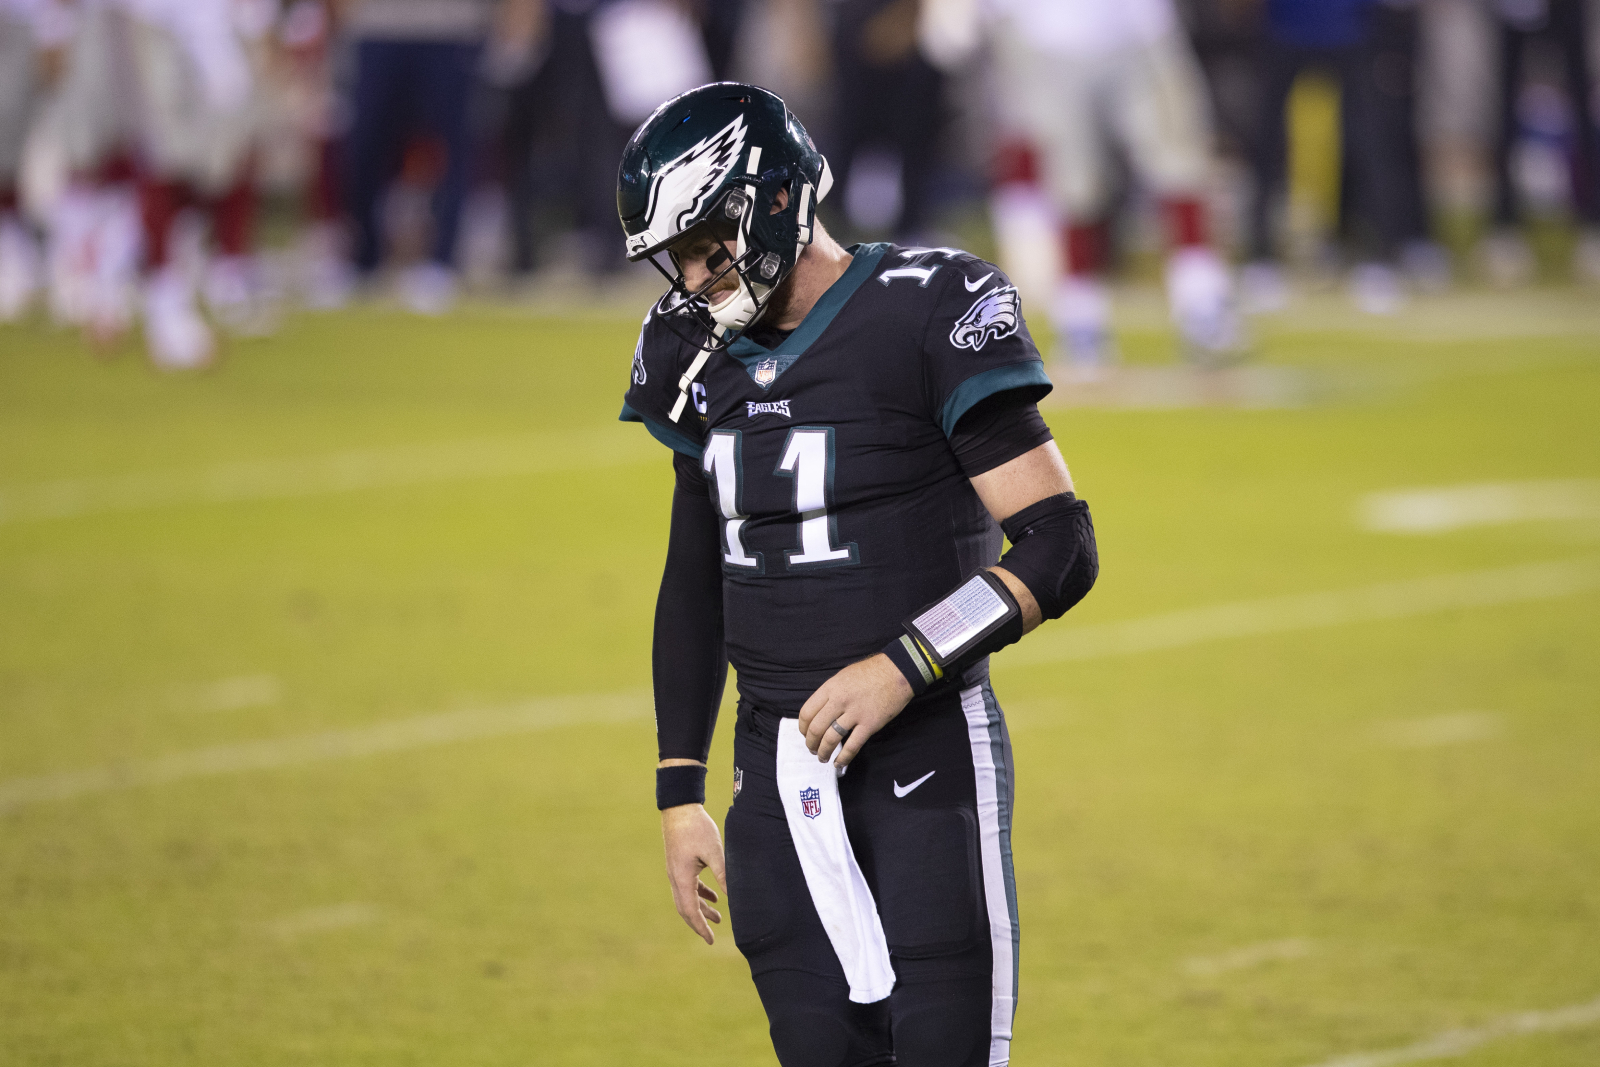 Carson Wentz has struggled for the Philadelphia Eagles this year. They seem to have no interest in helping him succeed either.